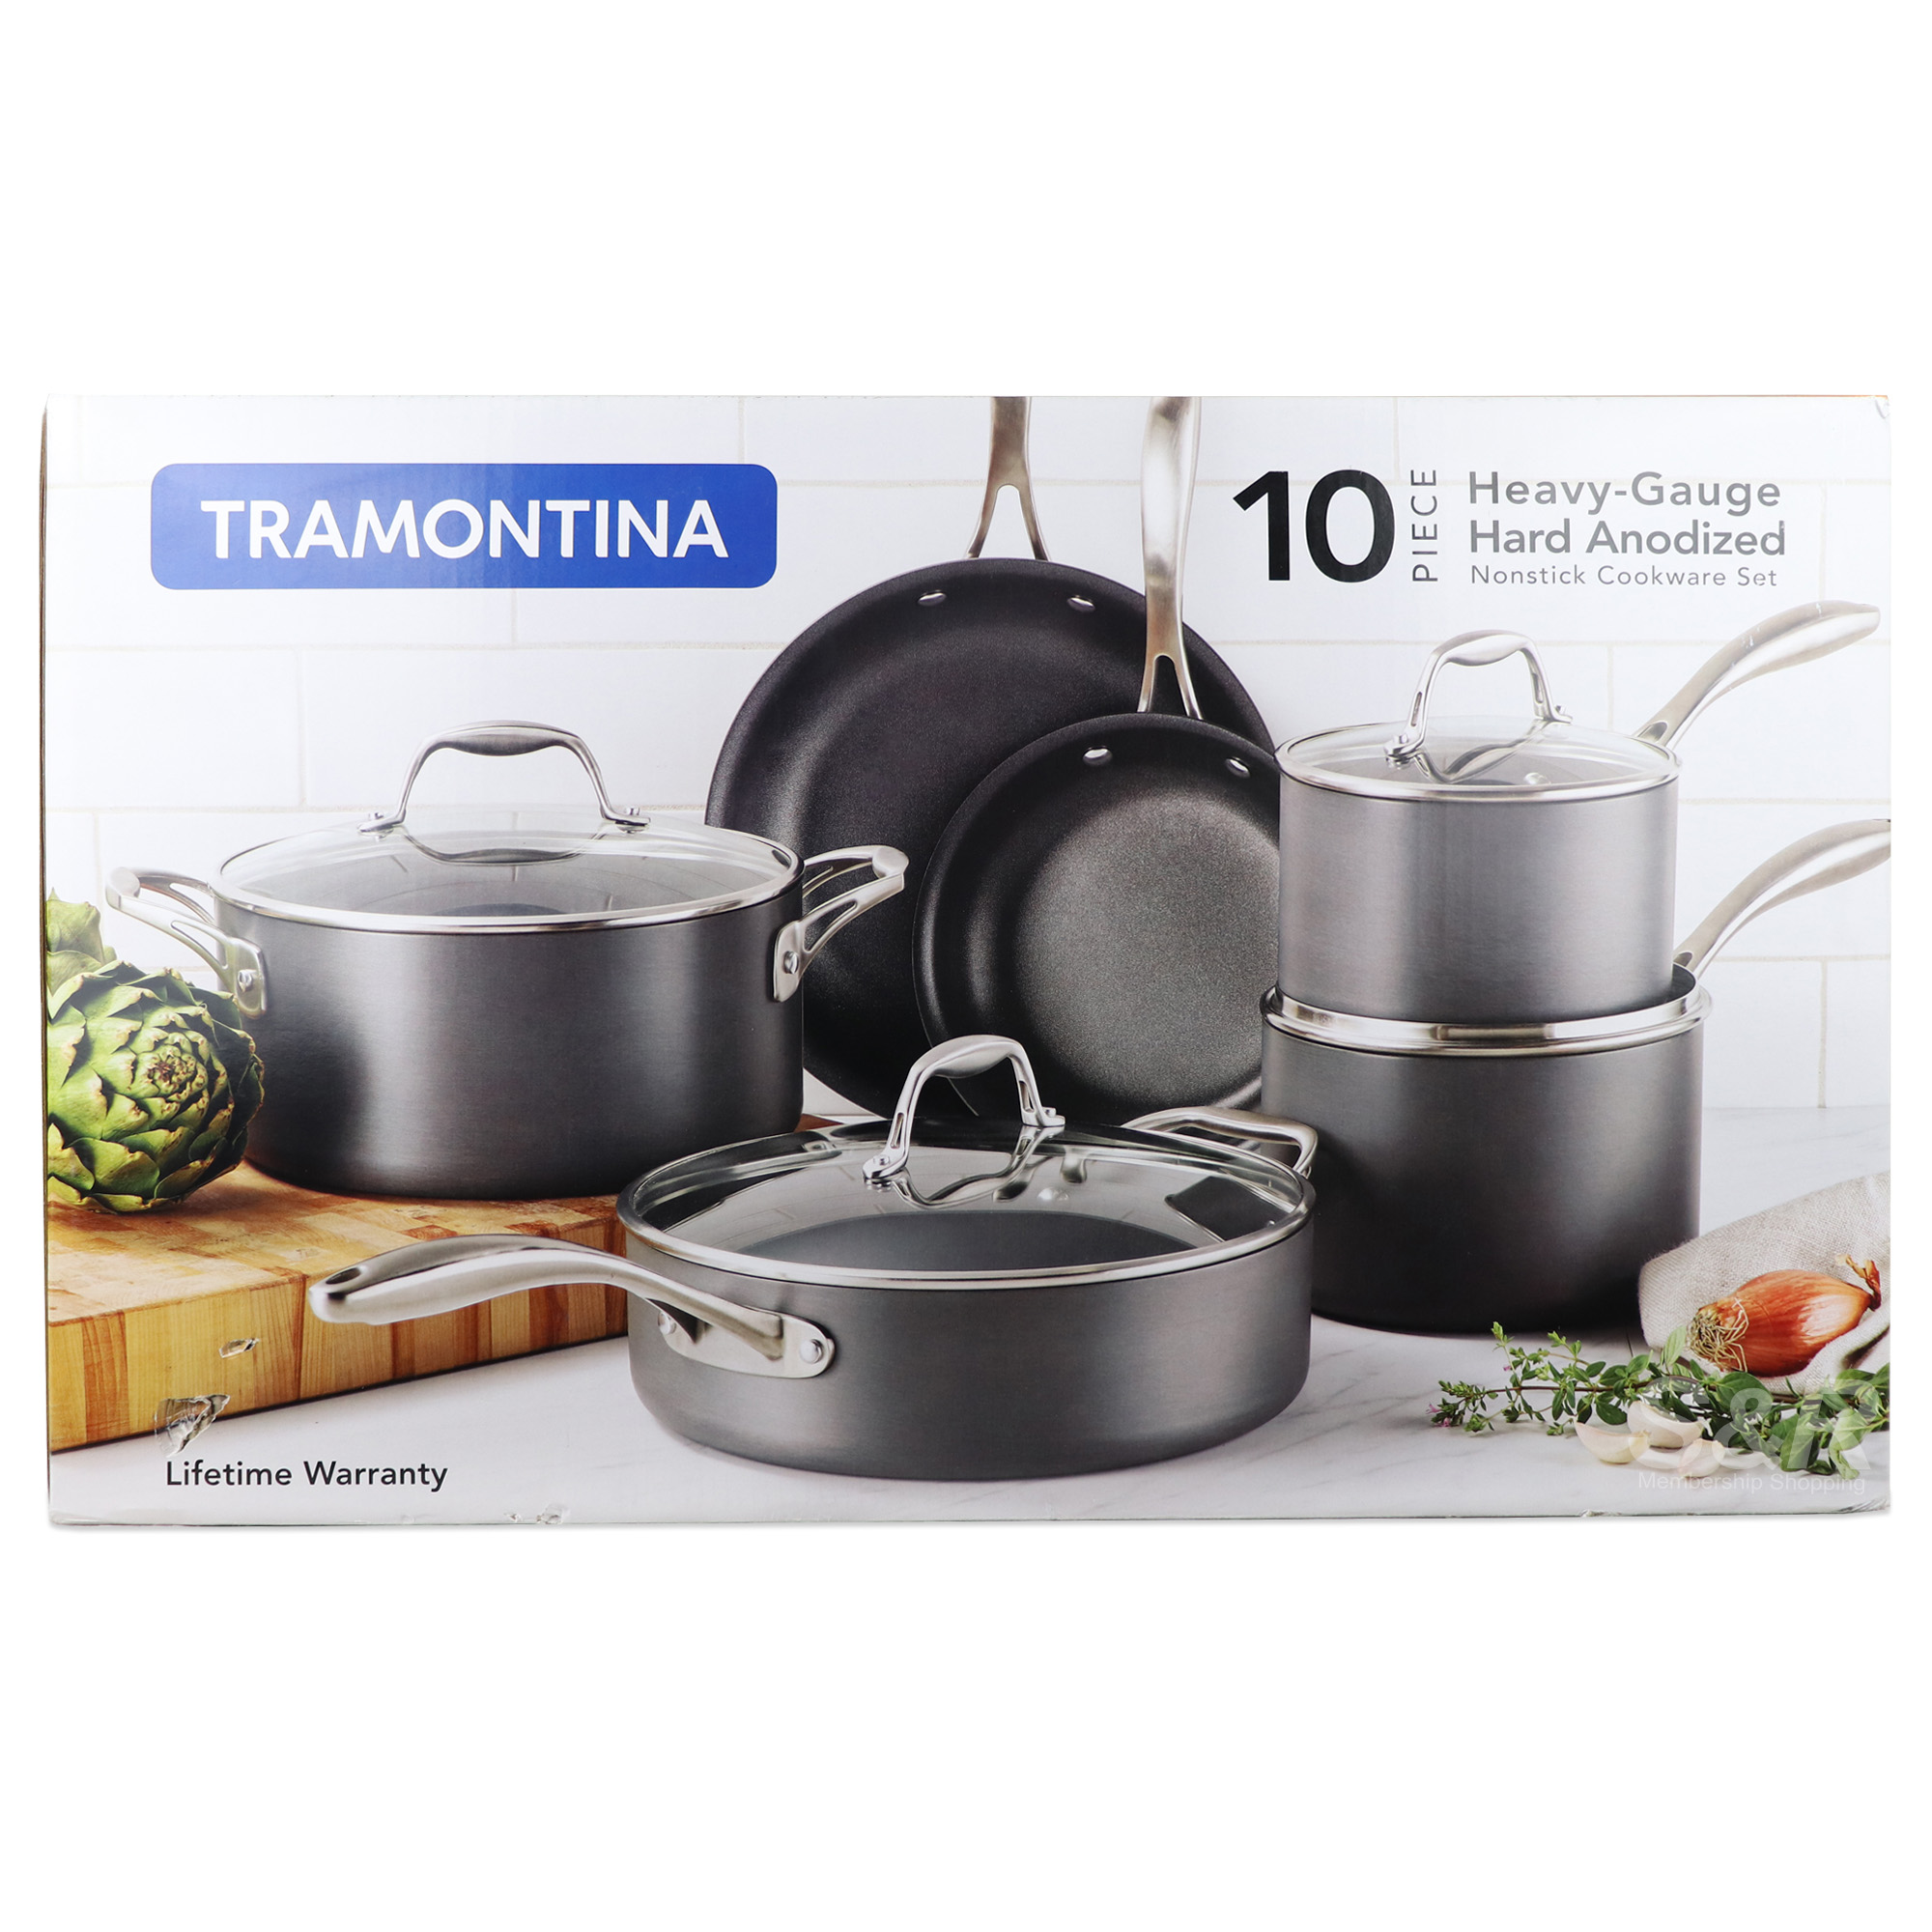 Tramontina Heavy-Gauge Hard Anodized Non Stick Cookware 10pc Set